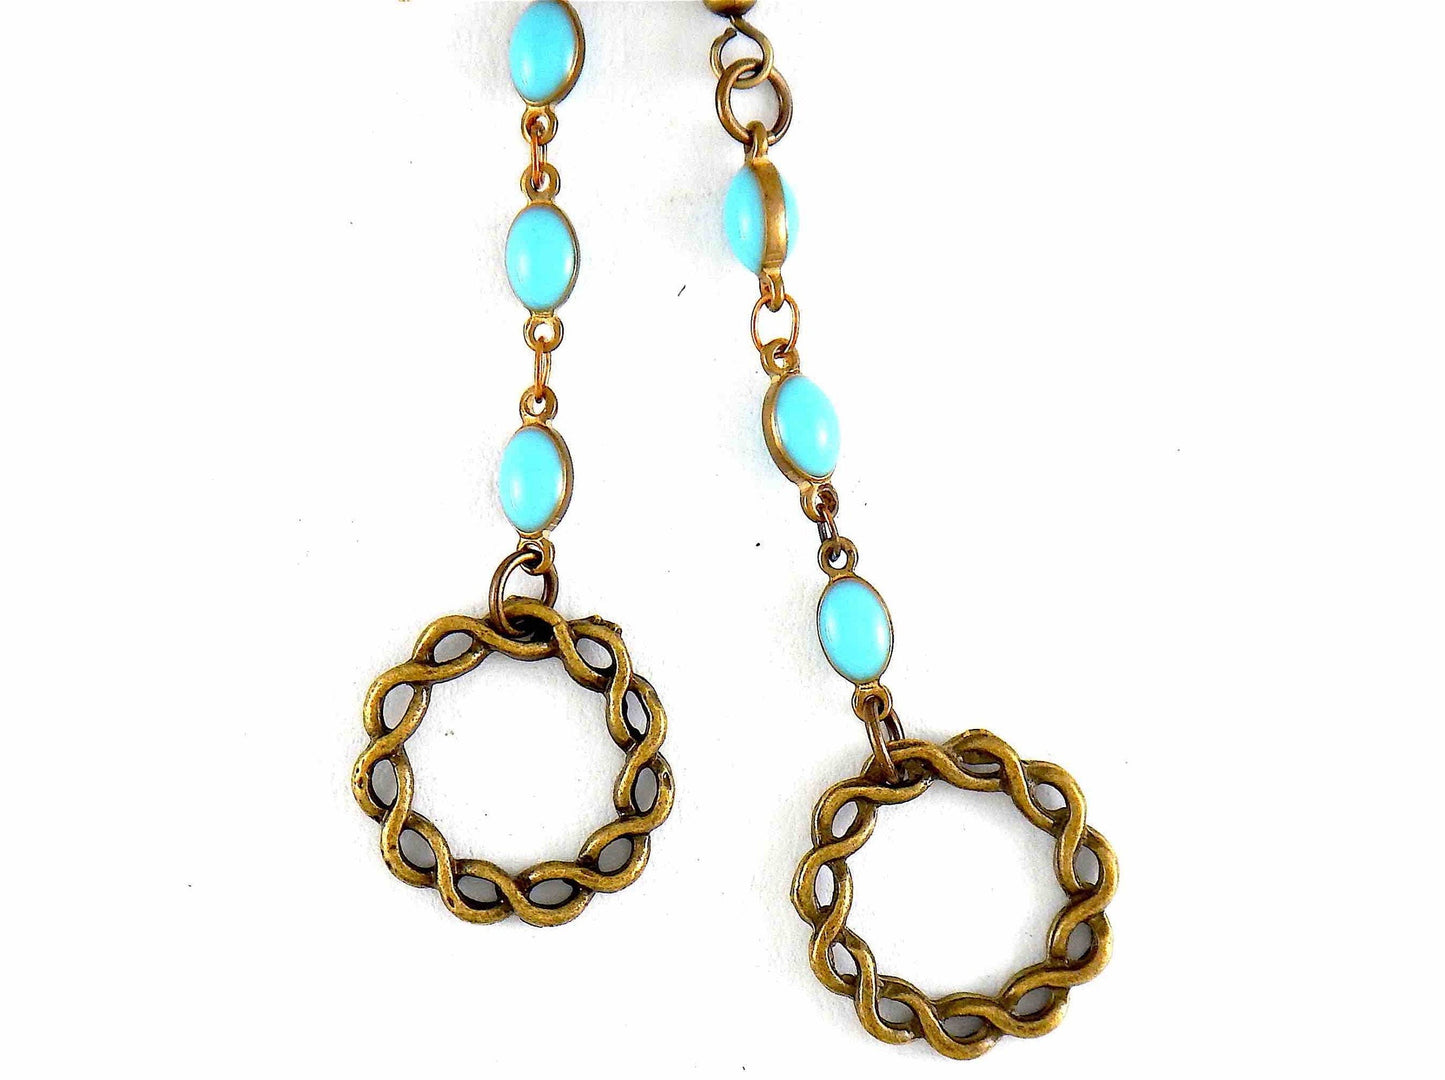 Long earrings with plaited brass rings and egg-shaped chain (off-white, black or turquoise), brass hooks